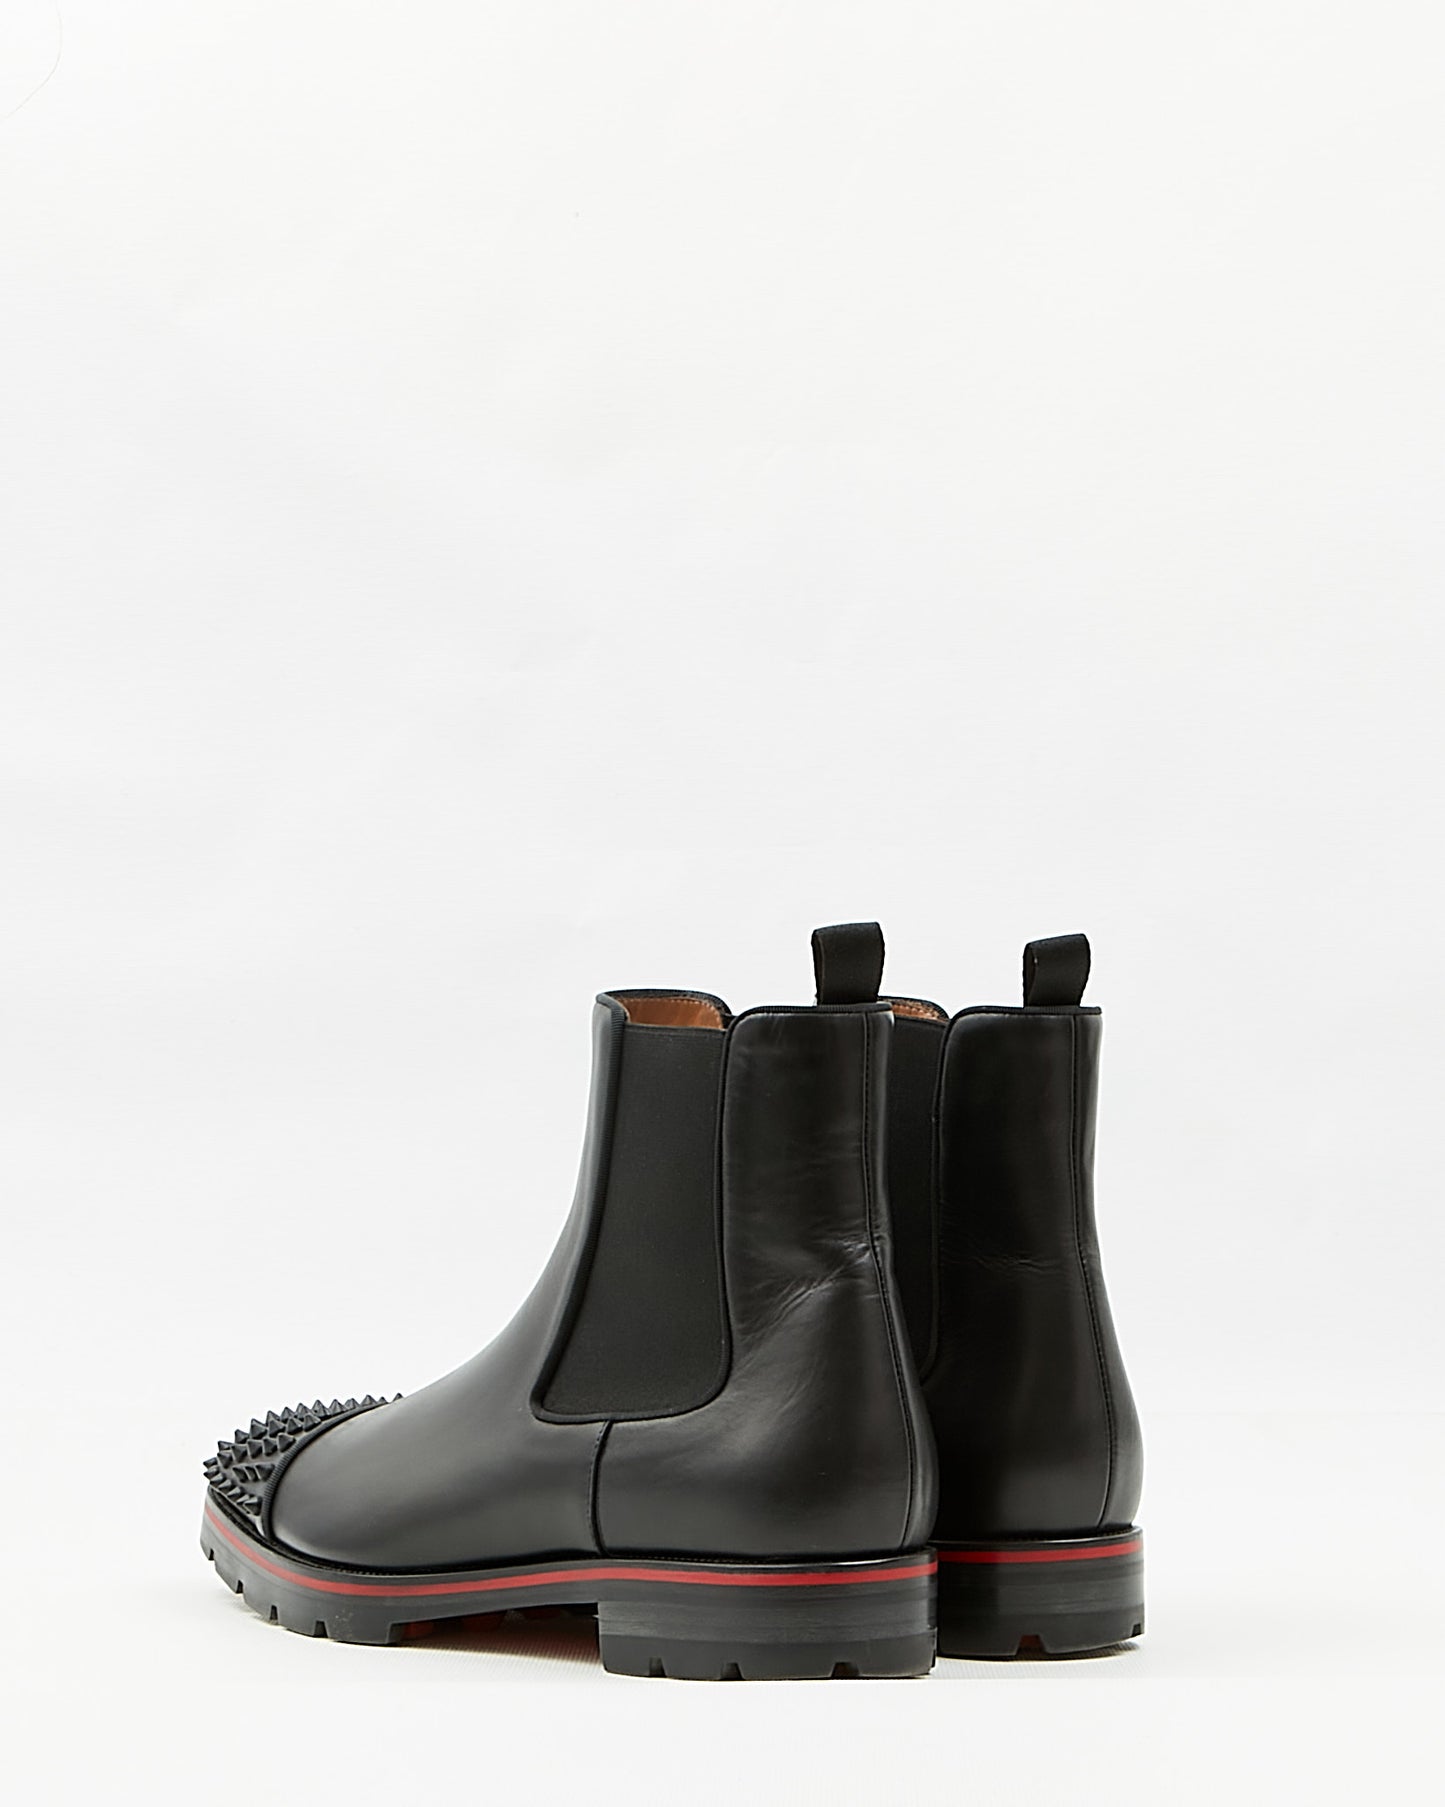 Louboutin Black Leather Melon Spikes Flat Calf / GG Chelsea Boots - 45